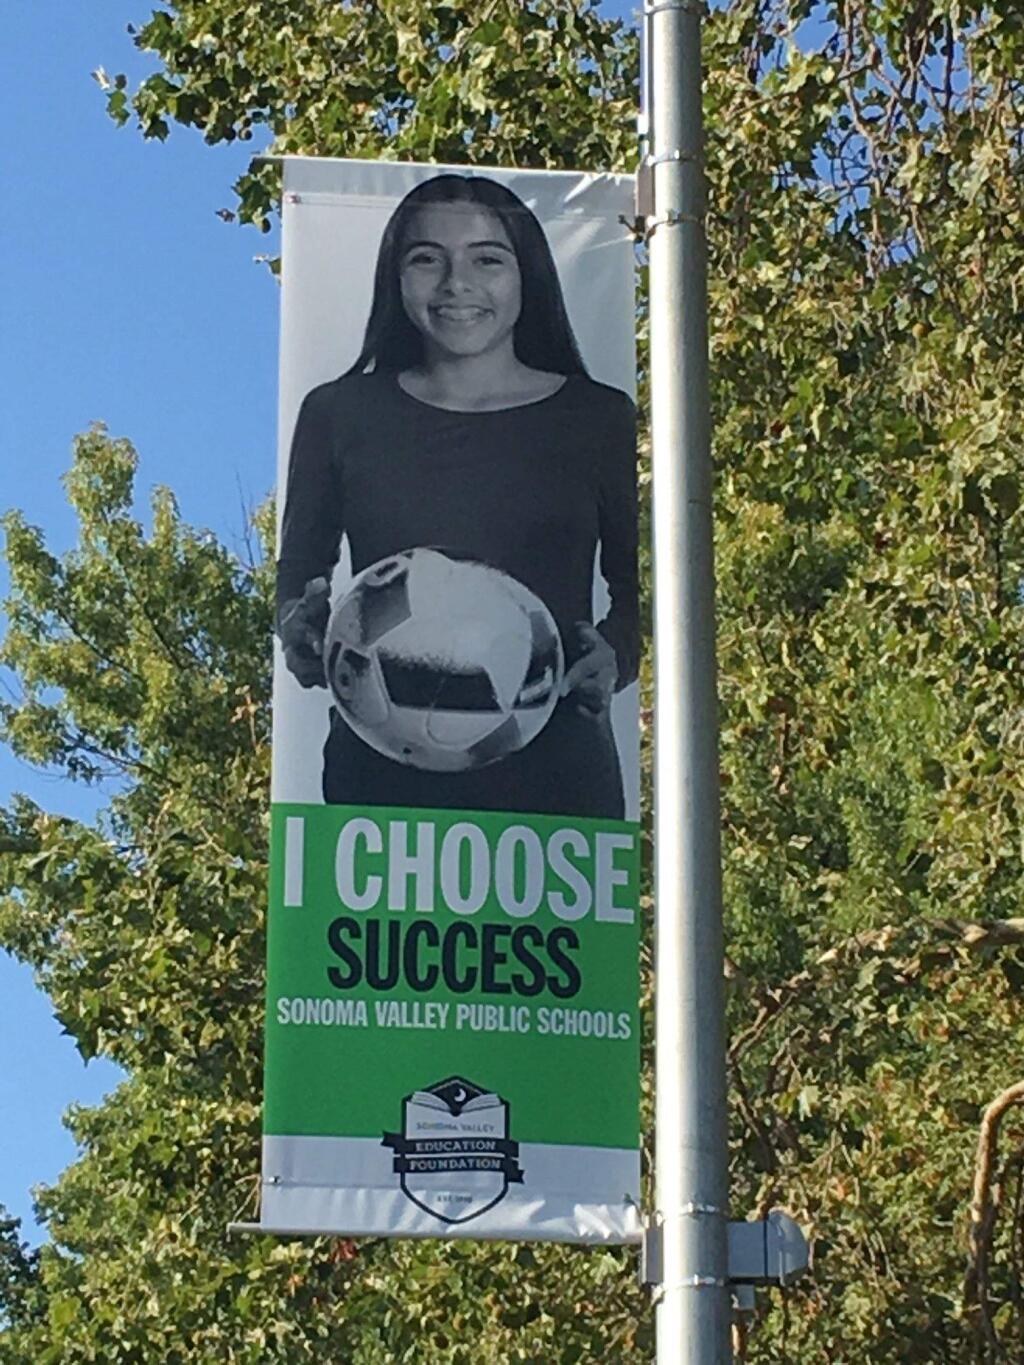 The ‘I Choose' campaign is meant to convey the many ways students can find success.